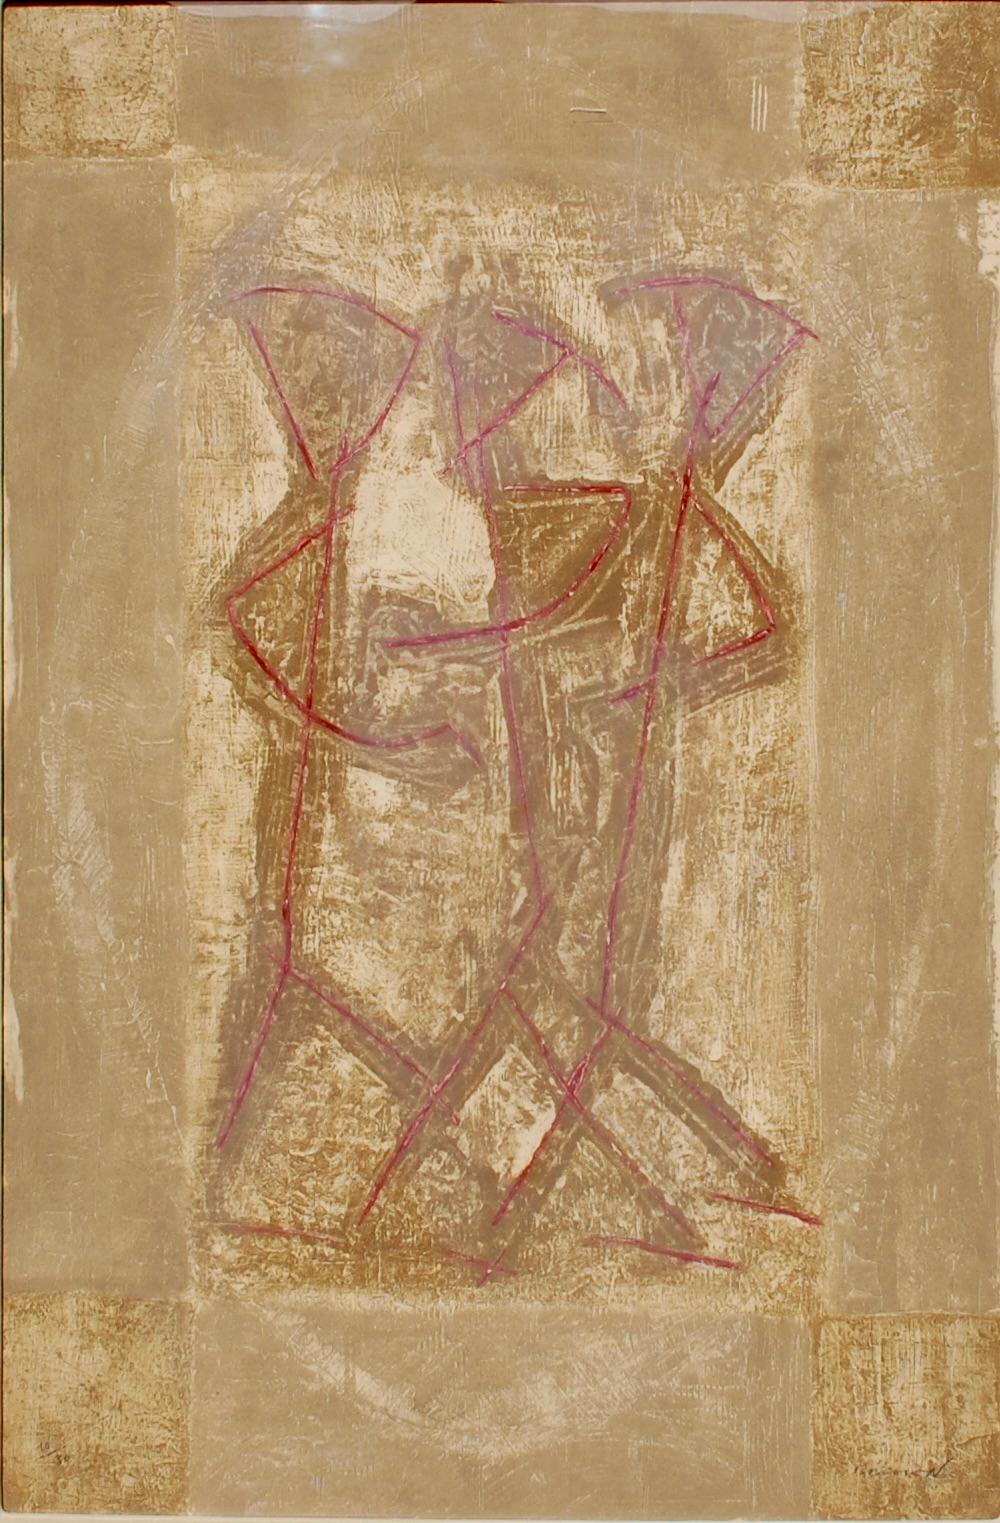 Three Abstract Figures Carborundum Etching 10/30 - Print by Pierre Marie Brisson